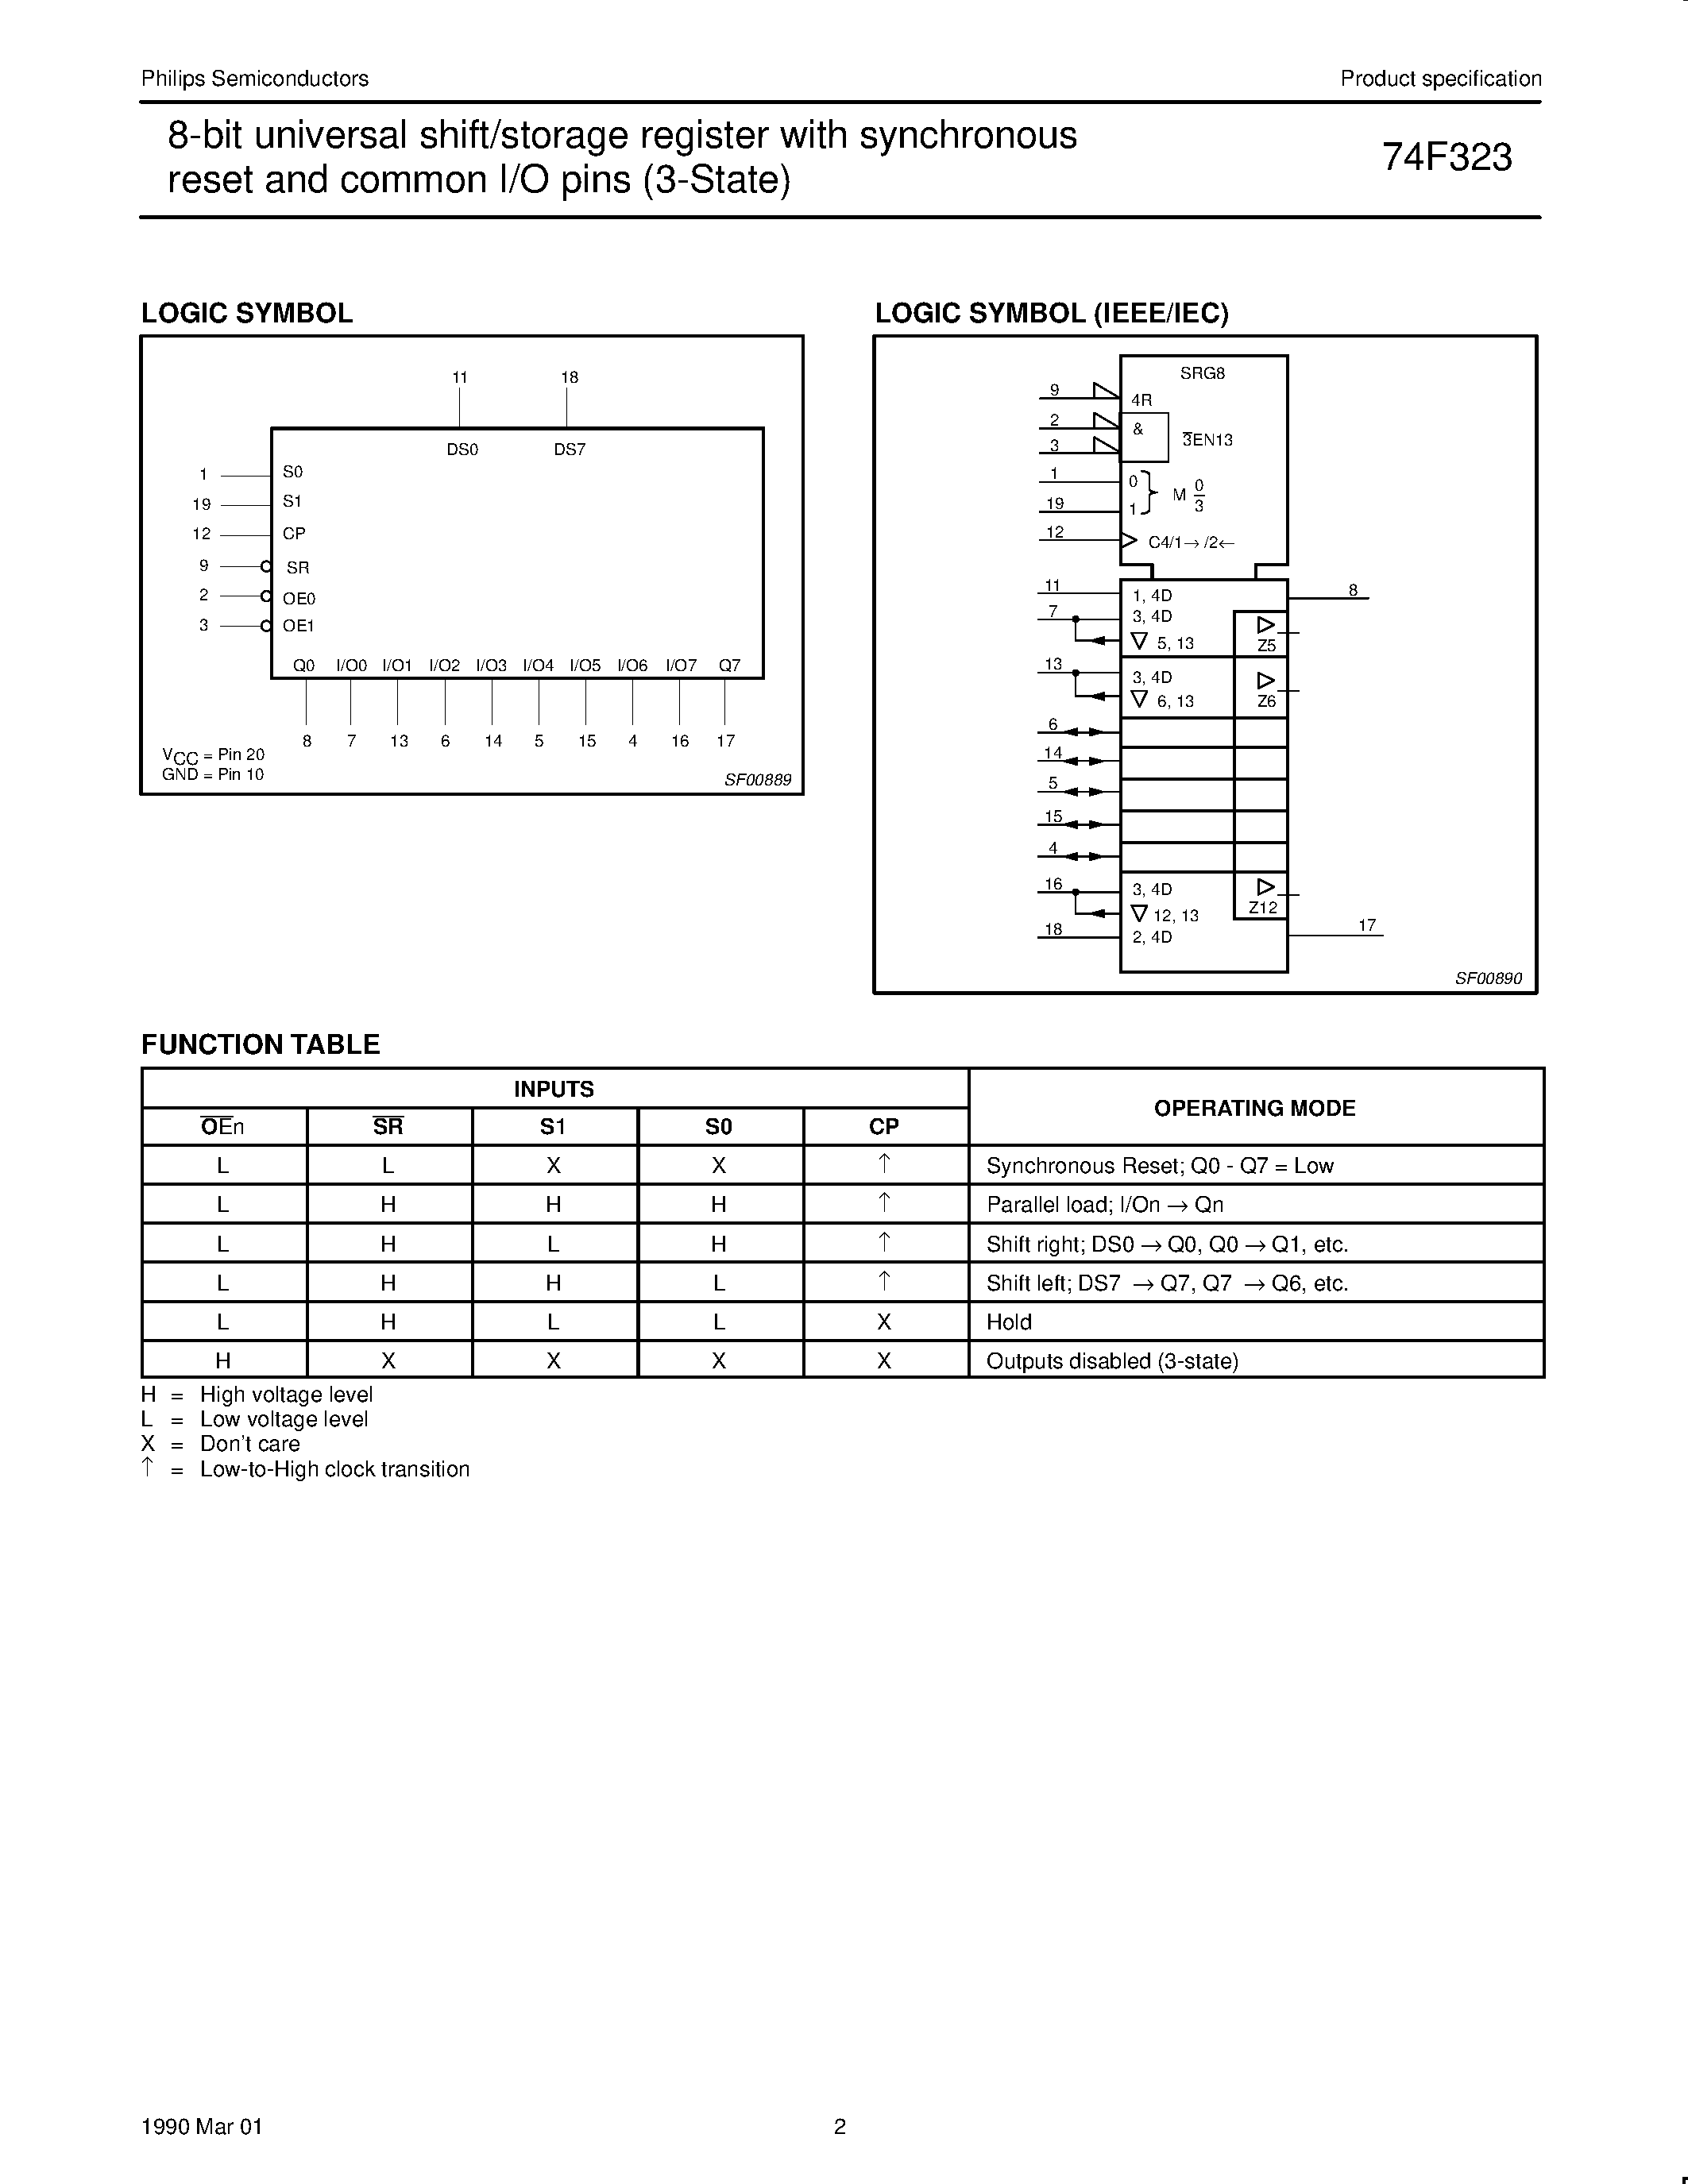 Даташит 74F323 - 8-bit universal shift/storage register with synchronous reset and common I/O pins 3-State страница 2